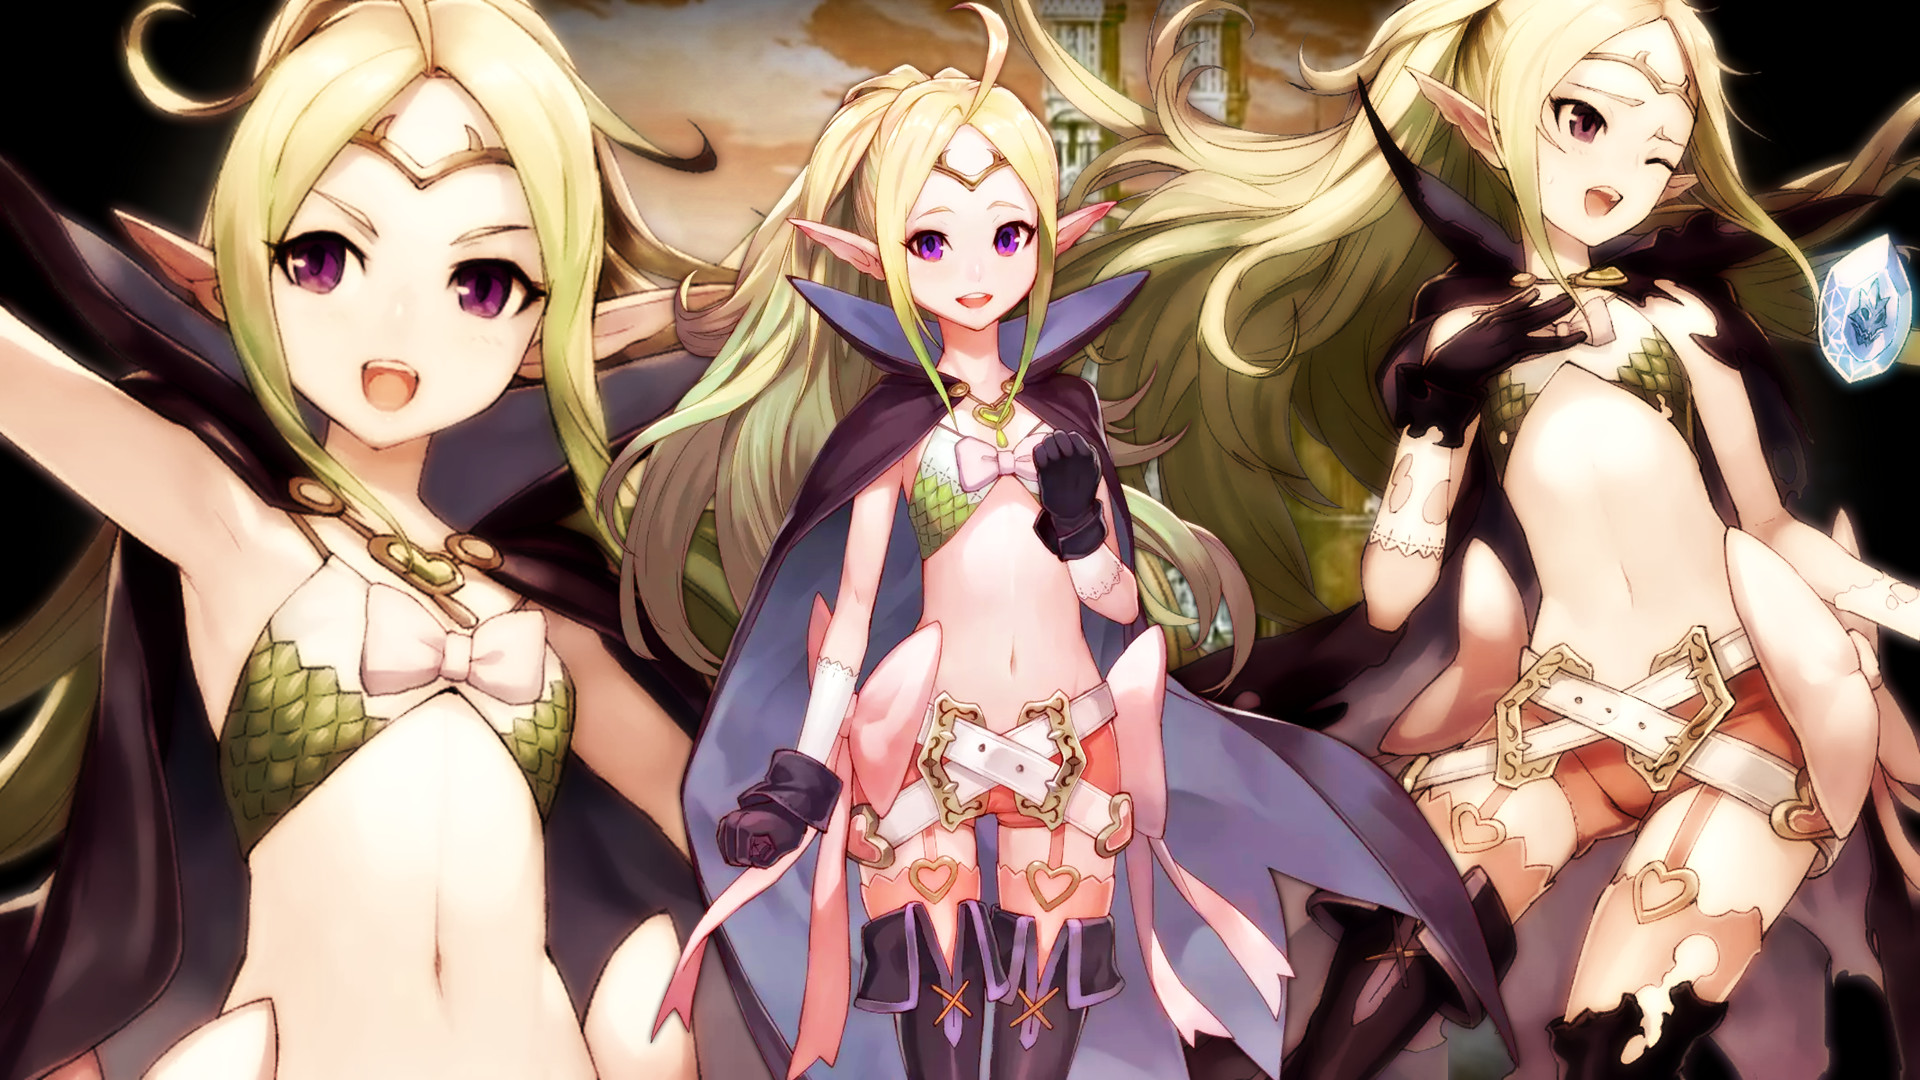 1920x1080 ... Fire Emblem Heroes - Nowi Wallpaper by AuroraMaster